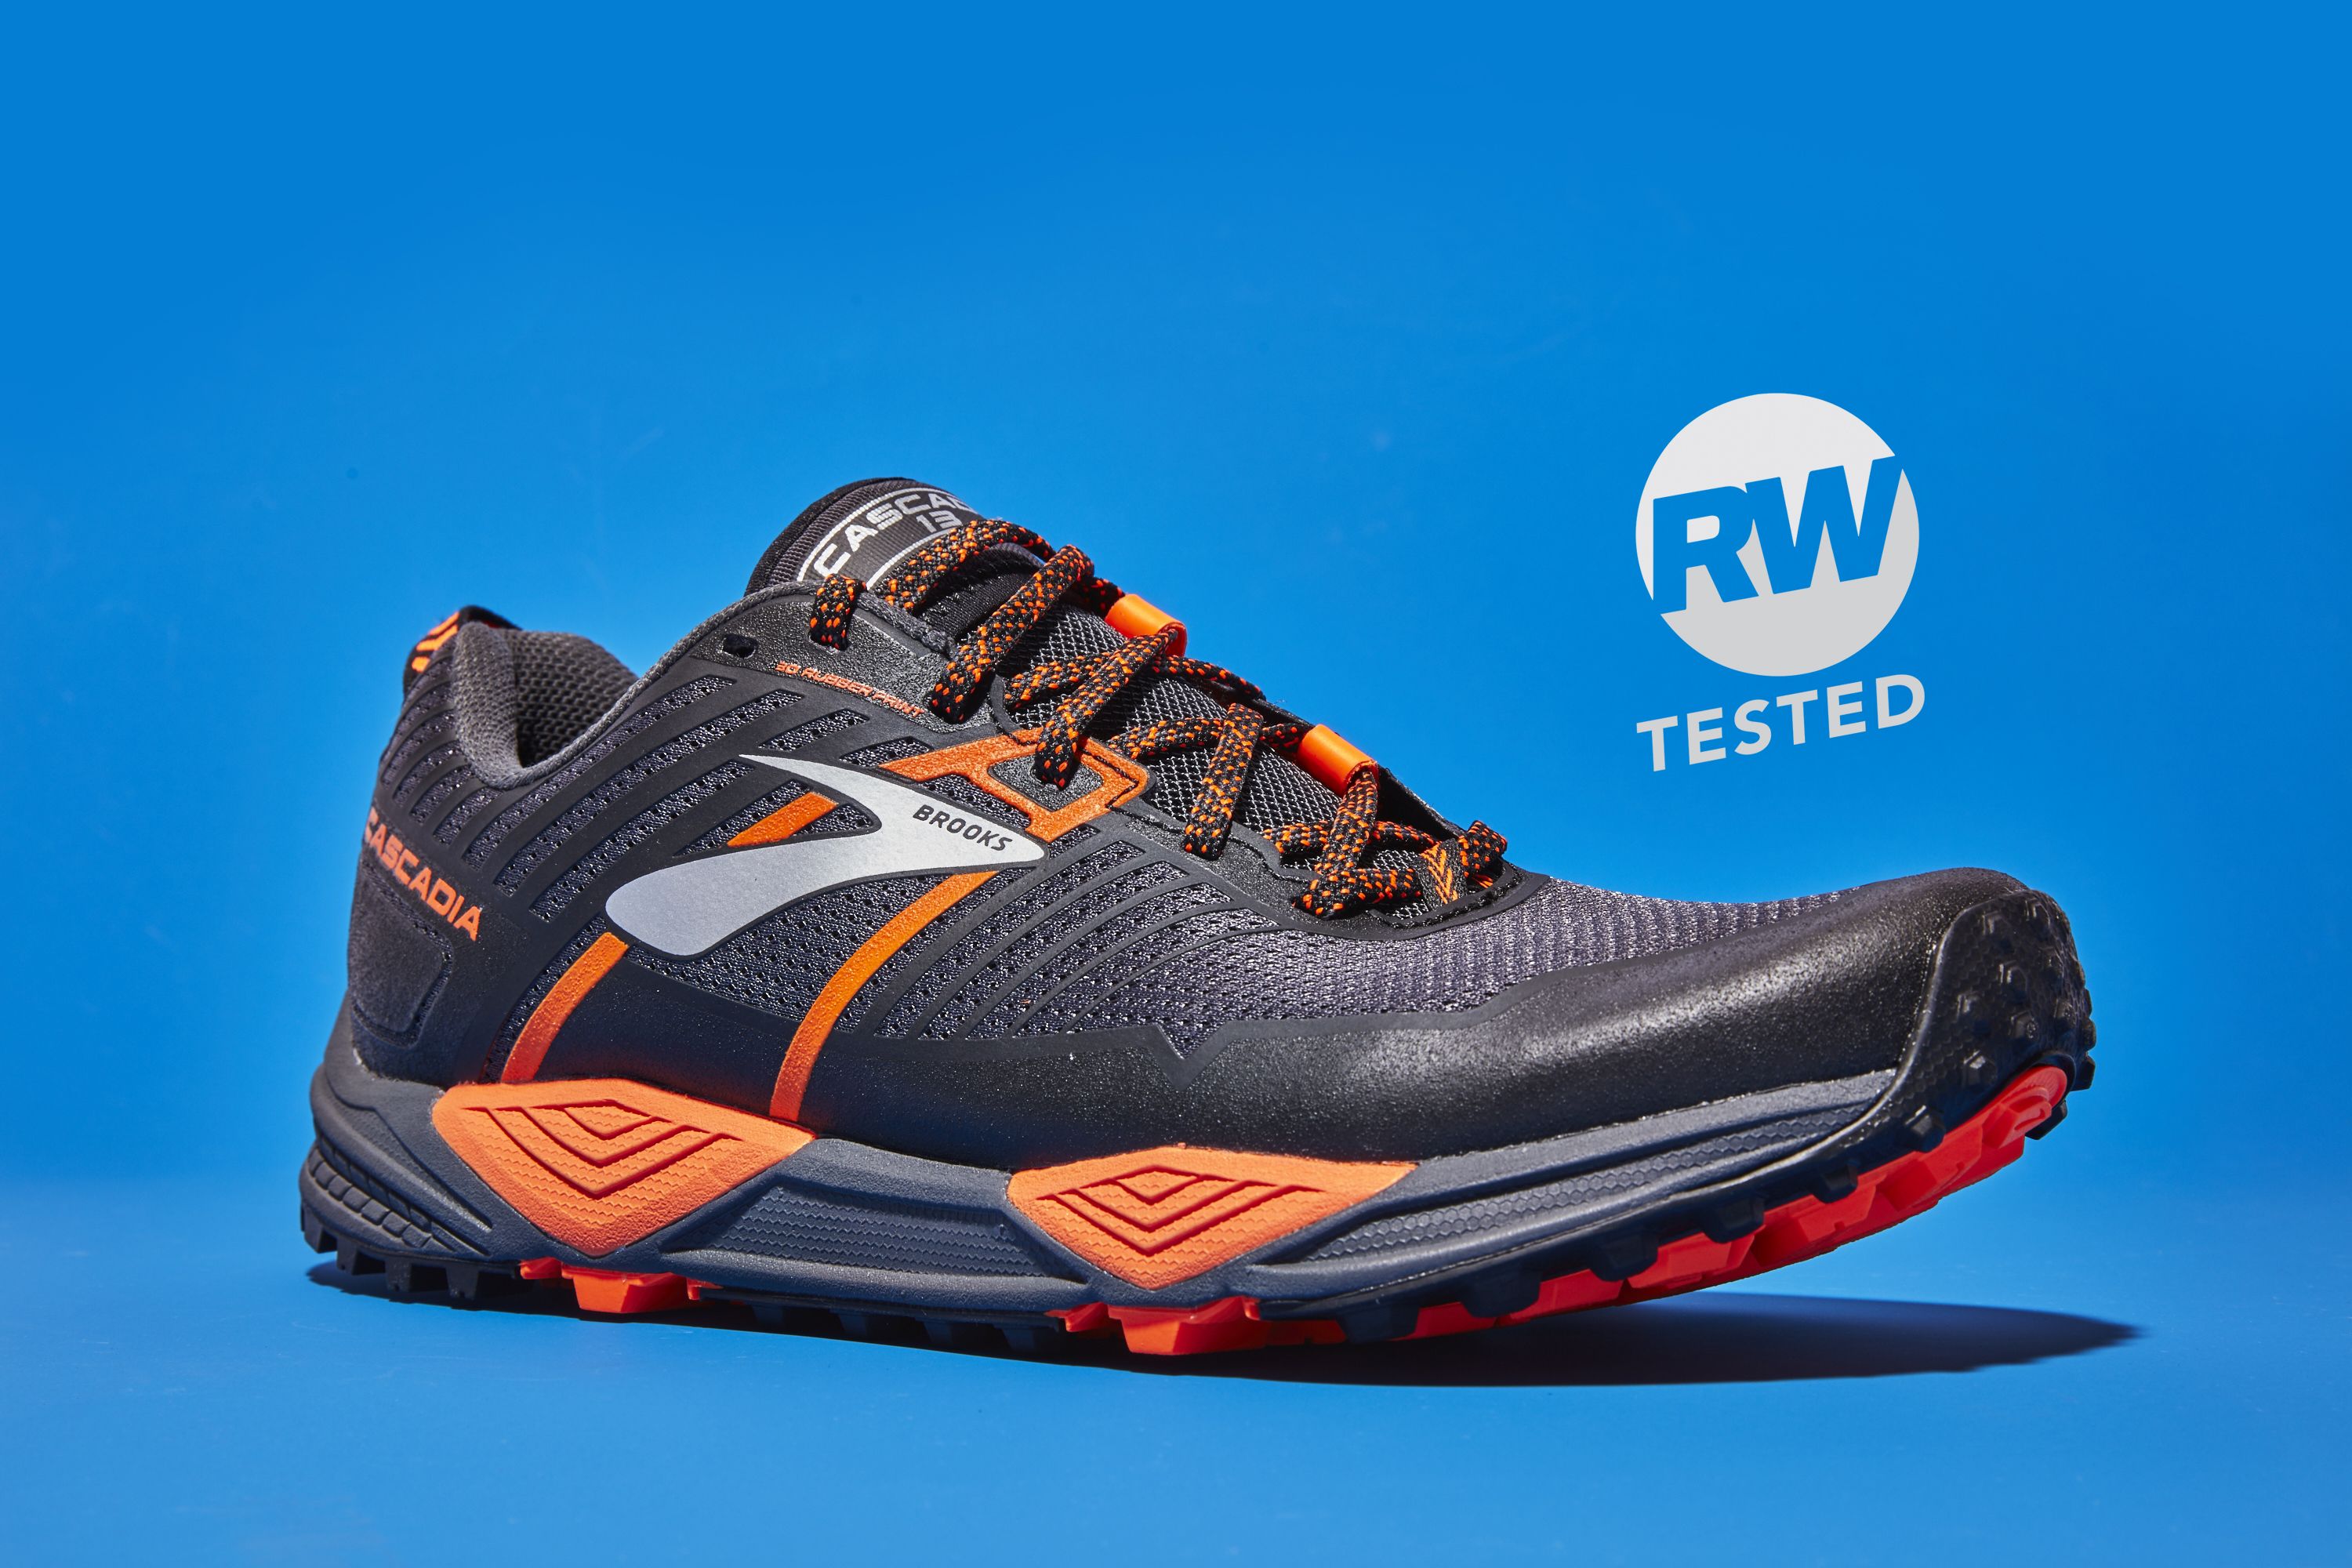 Running Lab - Brooks Cascadia 16 Product Review - Running Lab